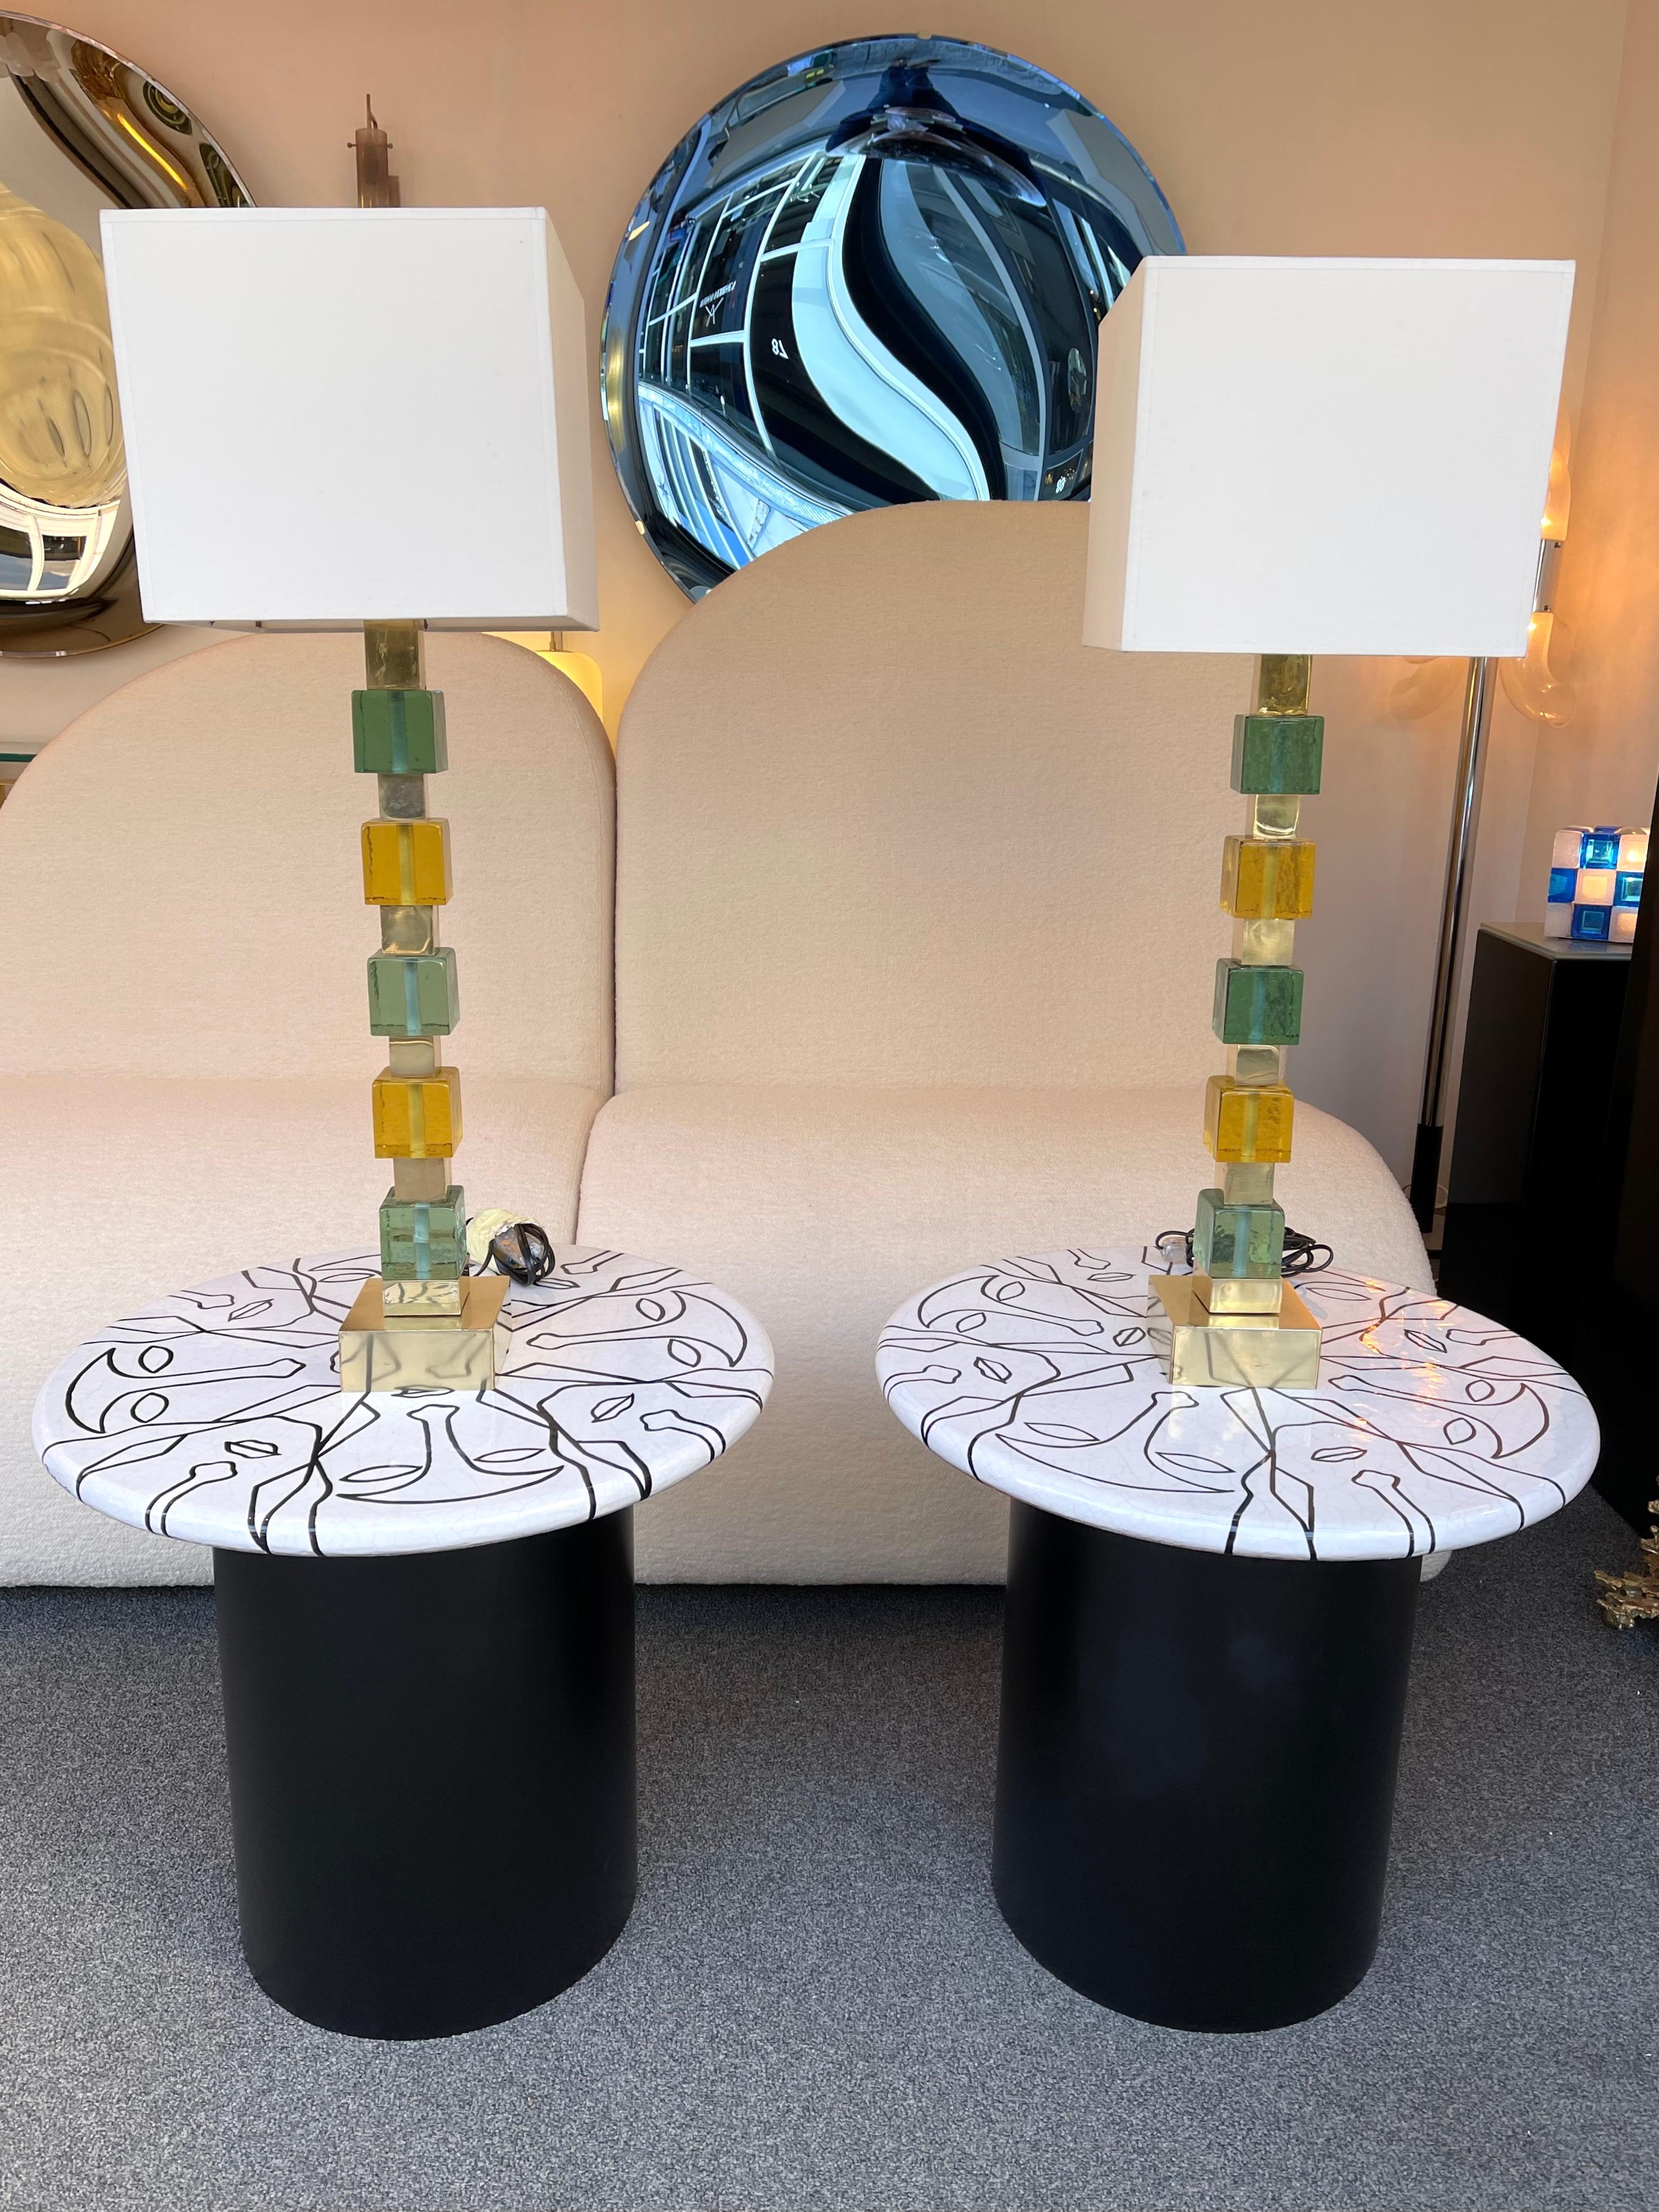 Pair of table or bedside brass lamps massive green and yellow Murano glass cube. Contemporary work from a small italian artisanal workshop.

Demo shades non included. Measurements in description with demo shades
Measurements lamp only H68 x W12 x